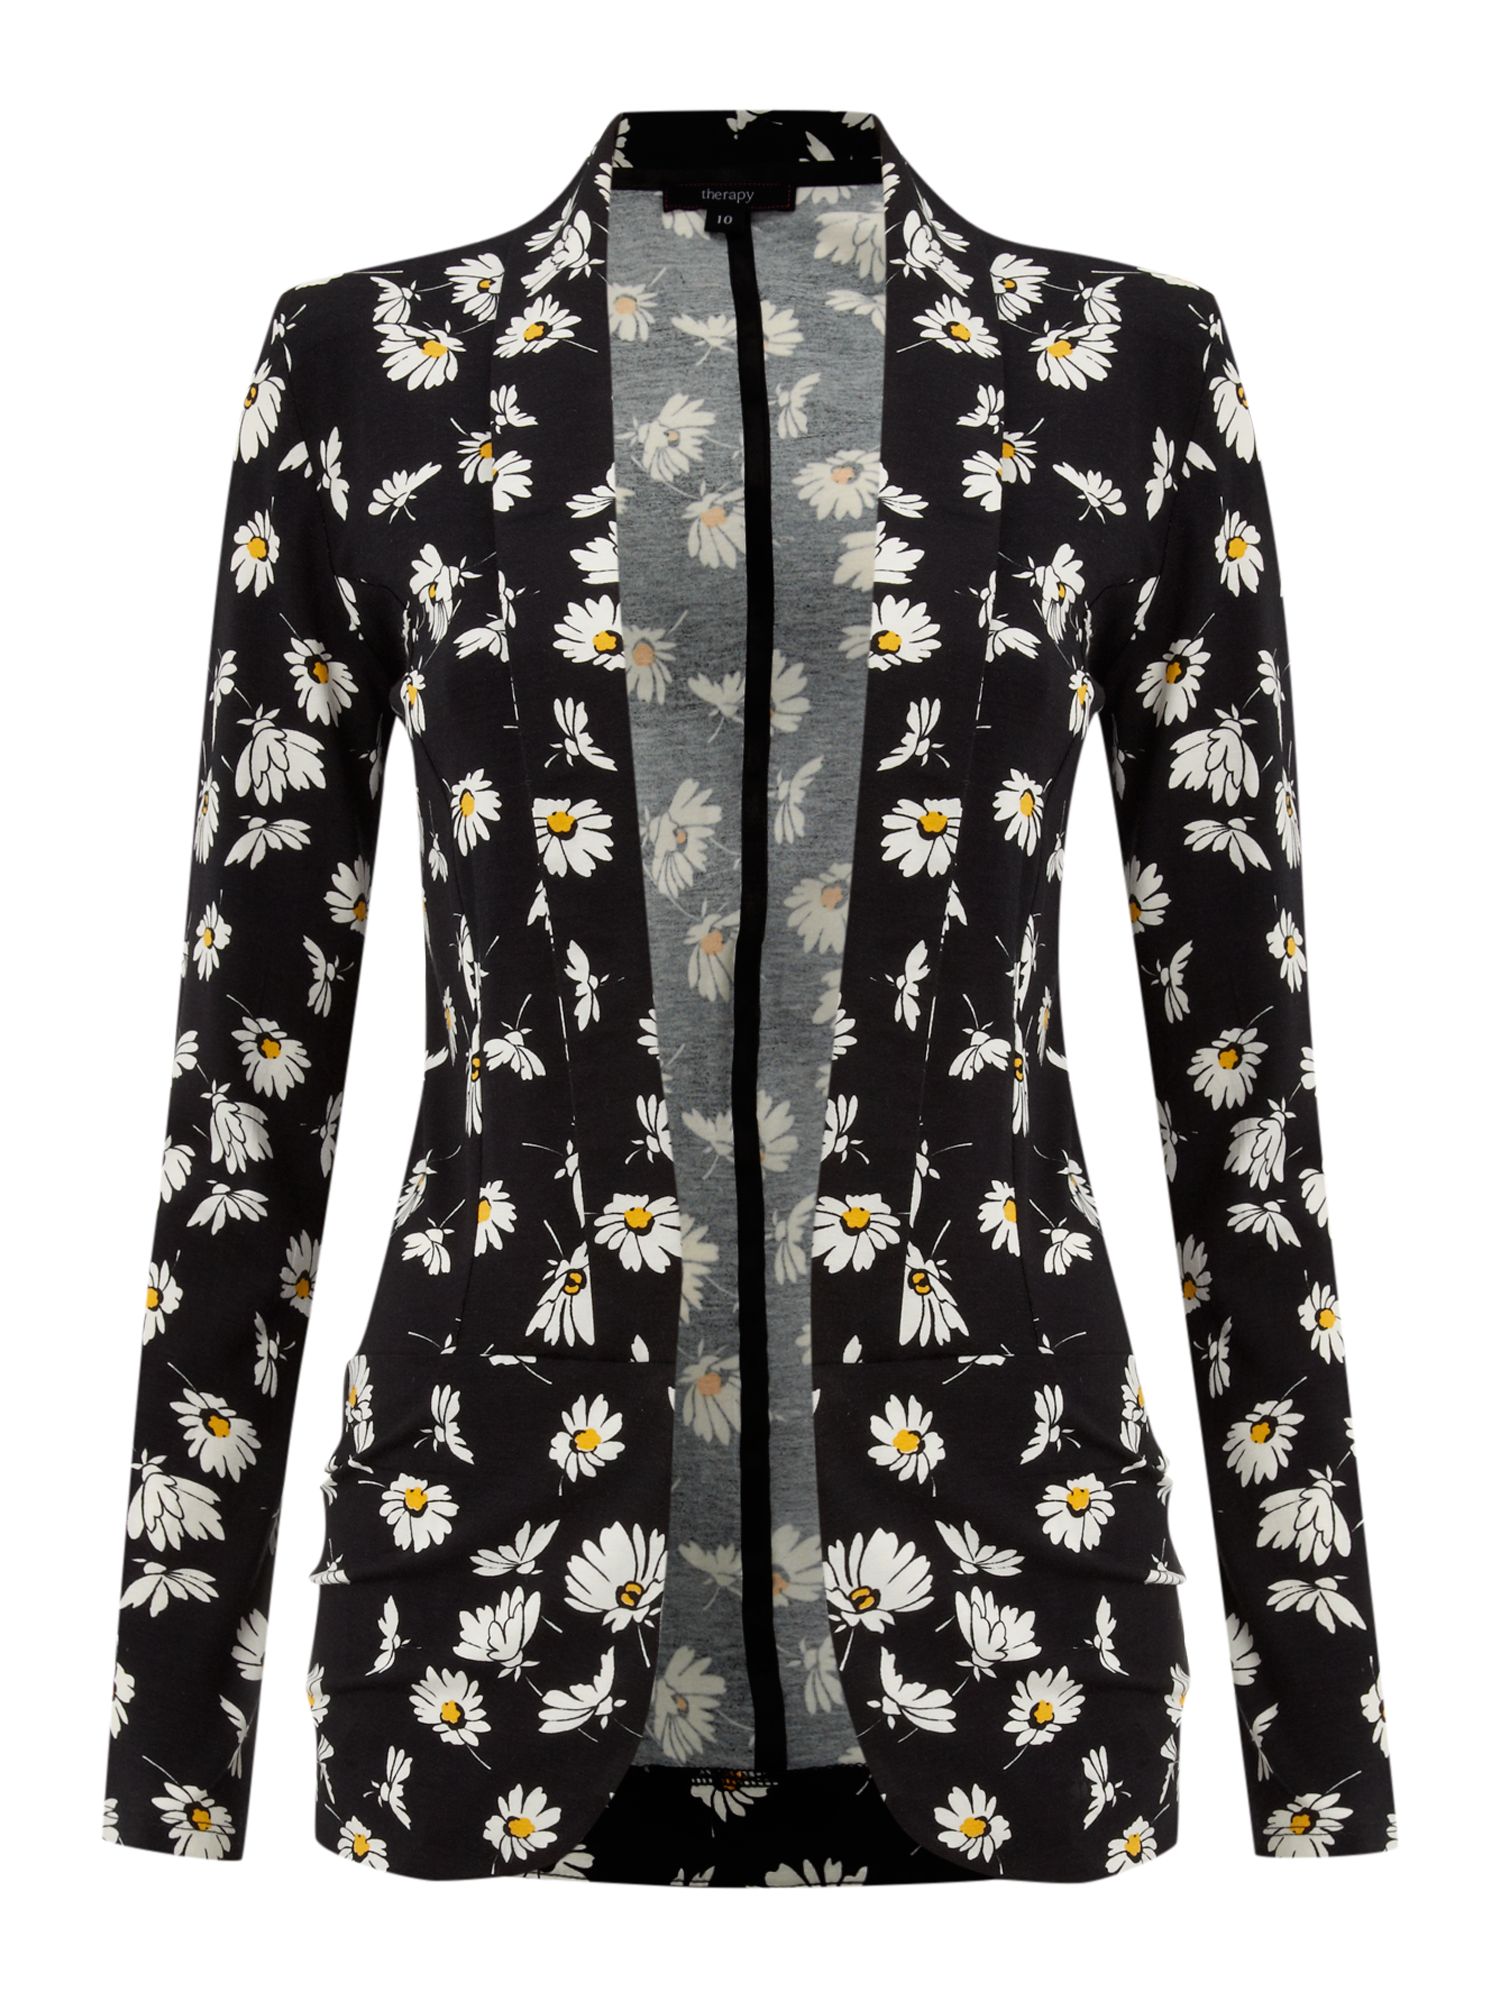 Therapy Daisy Floral Jersey Blazer in Black | Lyst